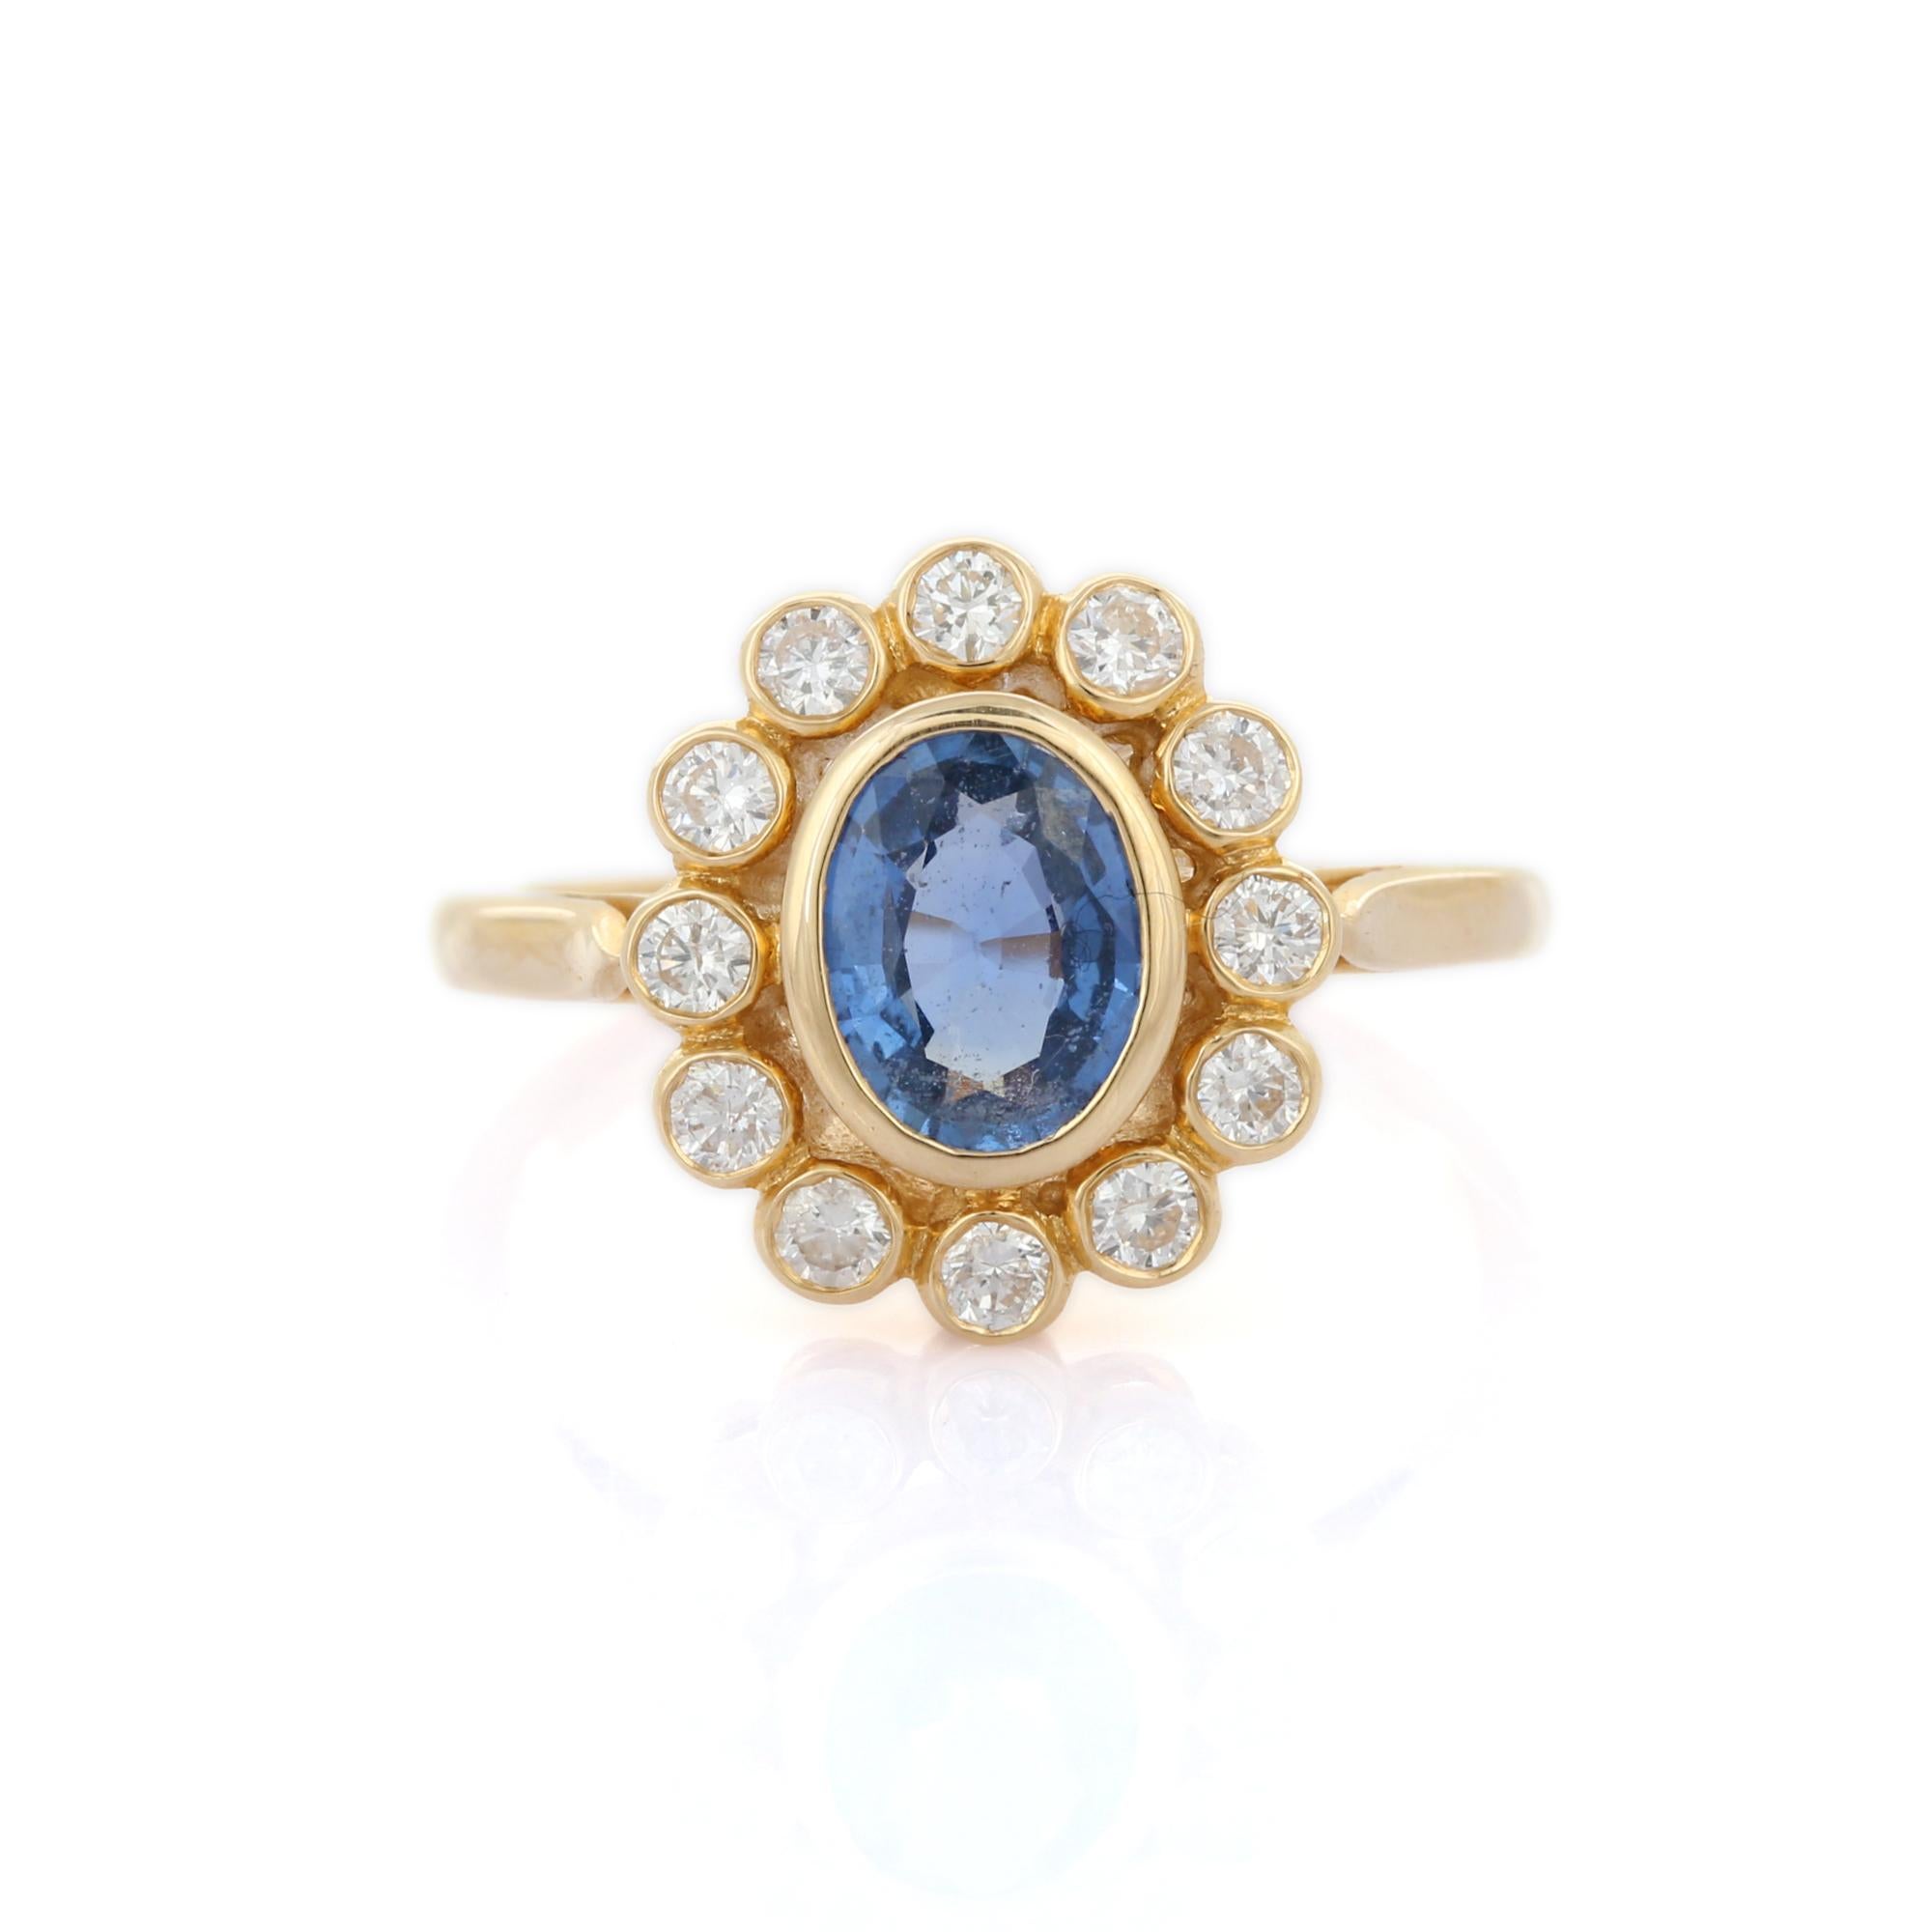 For Sale:  Contemporary 1.25 ct Sapphire Diamond Halo Ring in 14K Solid Yellow Gold 3